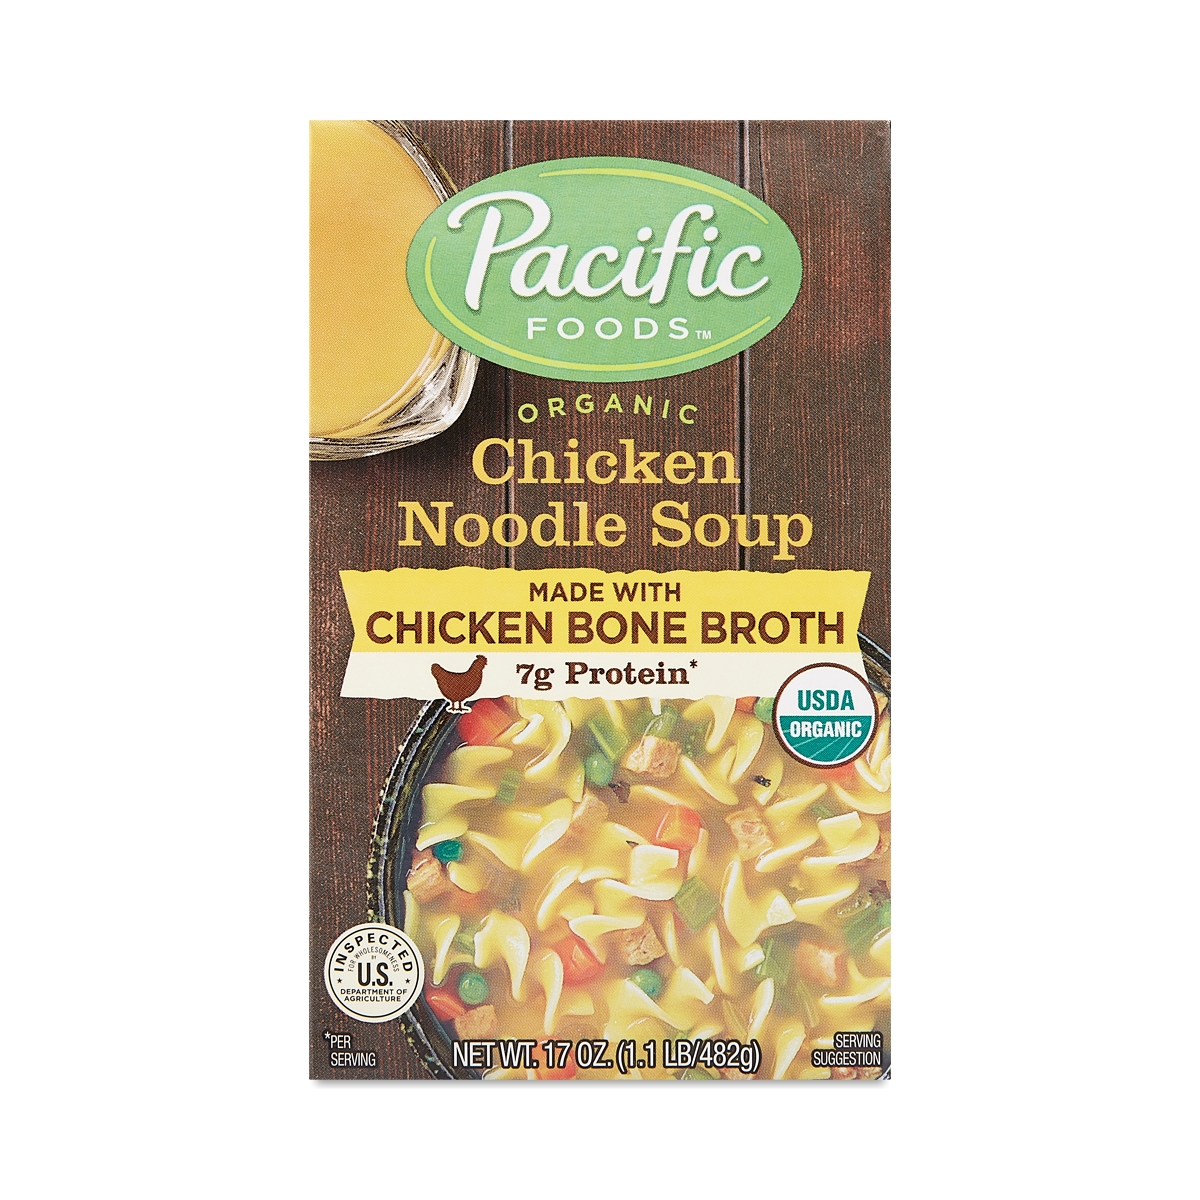 Pacific Foods Organic Chicken Noodle Soup with Chicken Bone Broth 17 oz carton